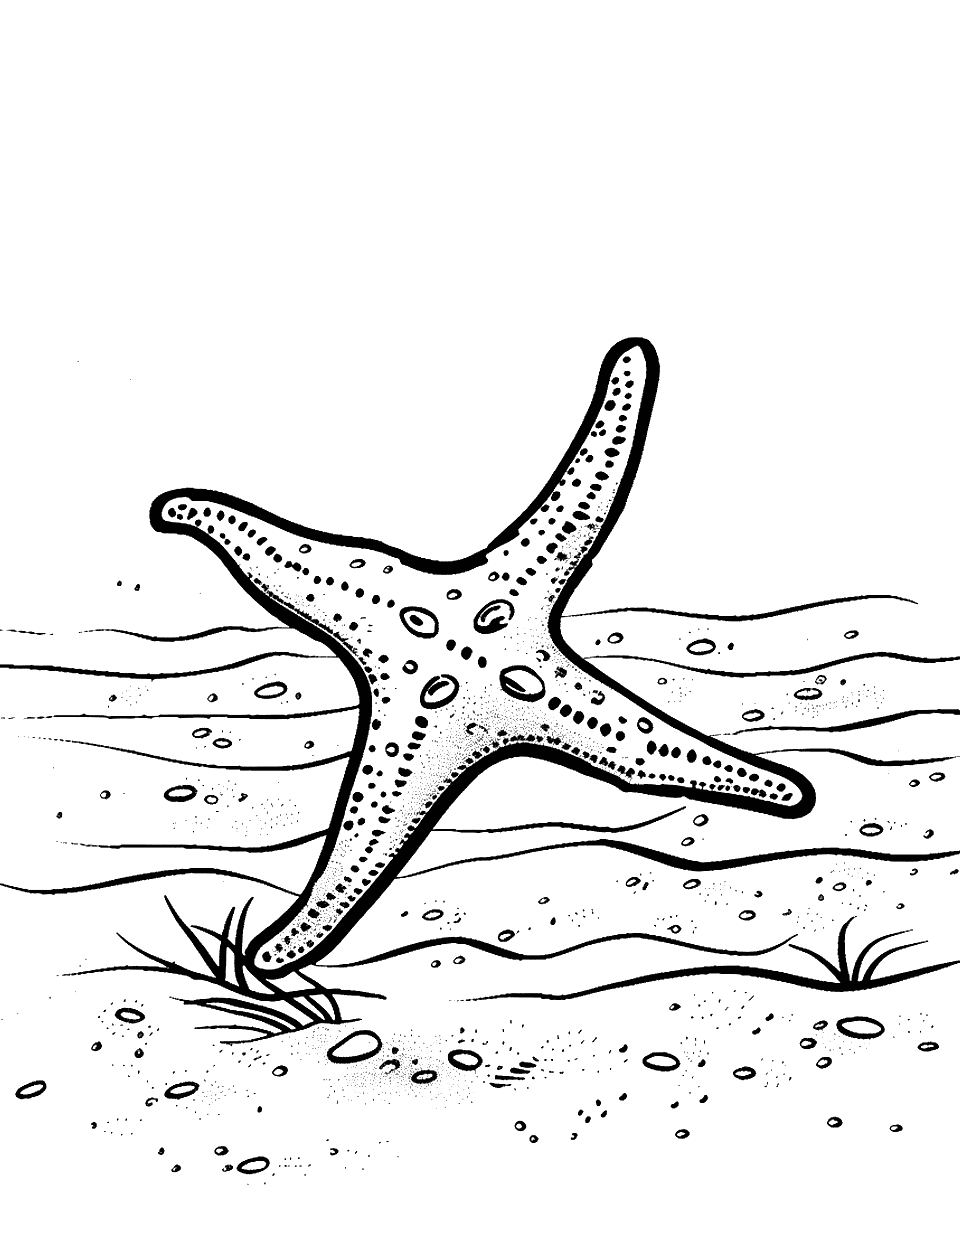 Starfish on a Sandy Ocean Floor Sea Creature Coloring Page - A starfish resting in the middle of the sandy ocean floor.